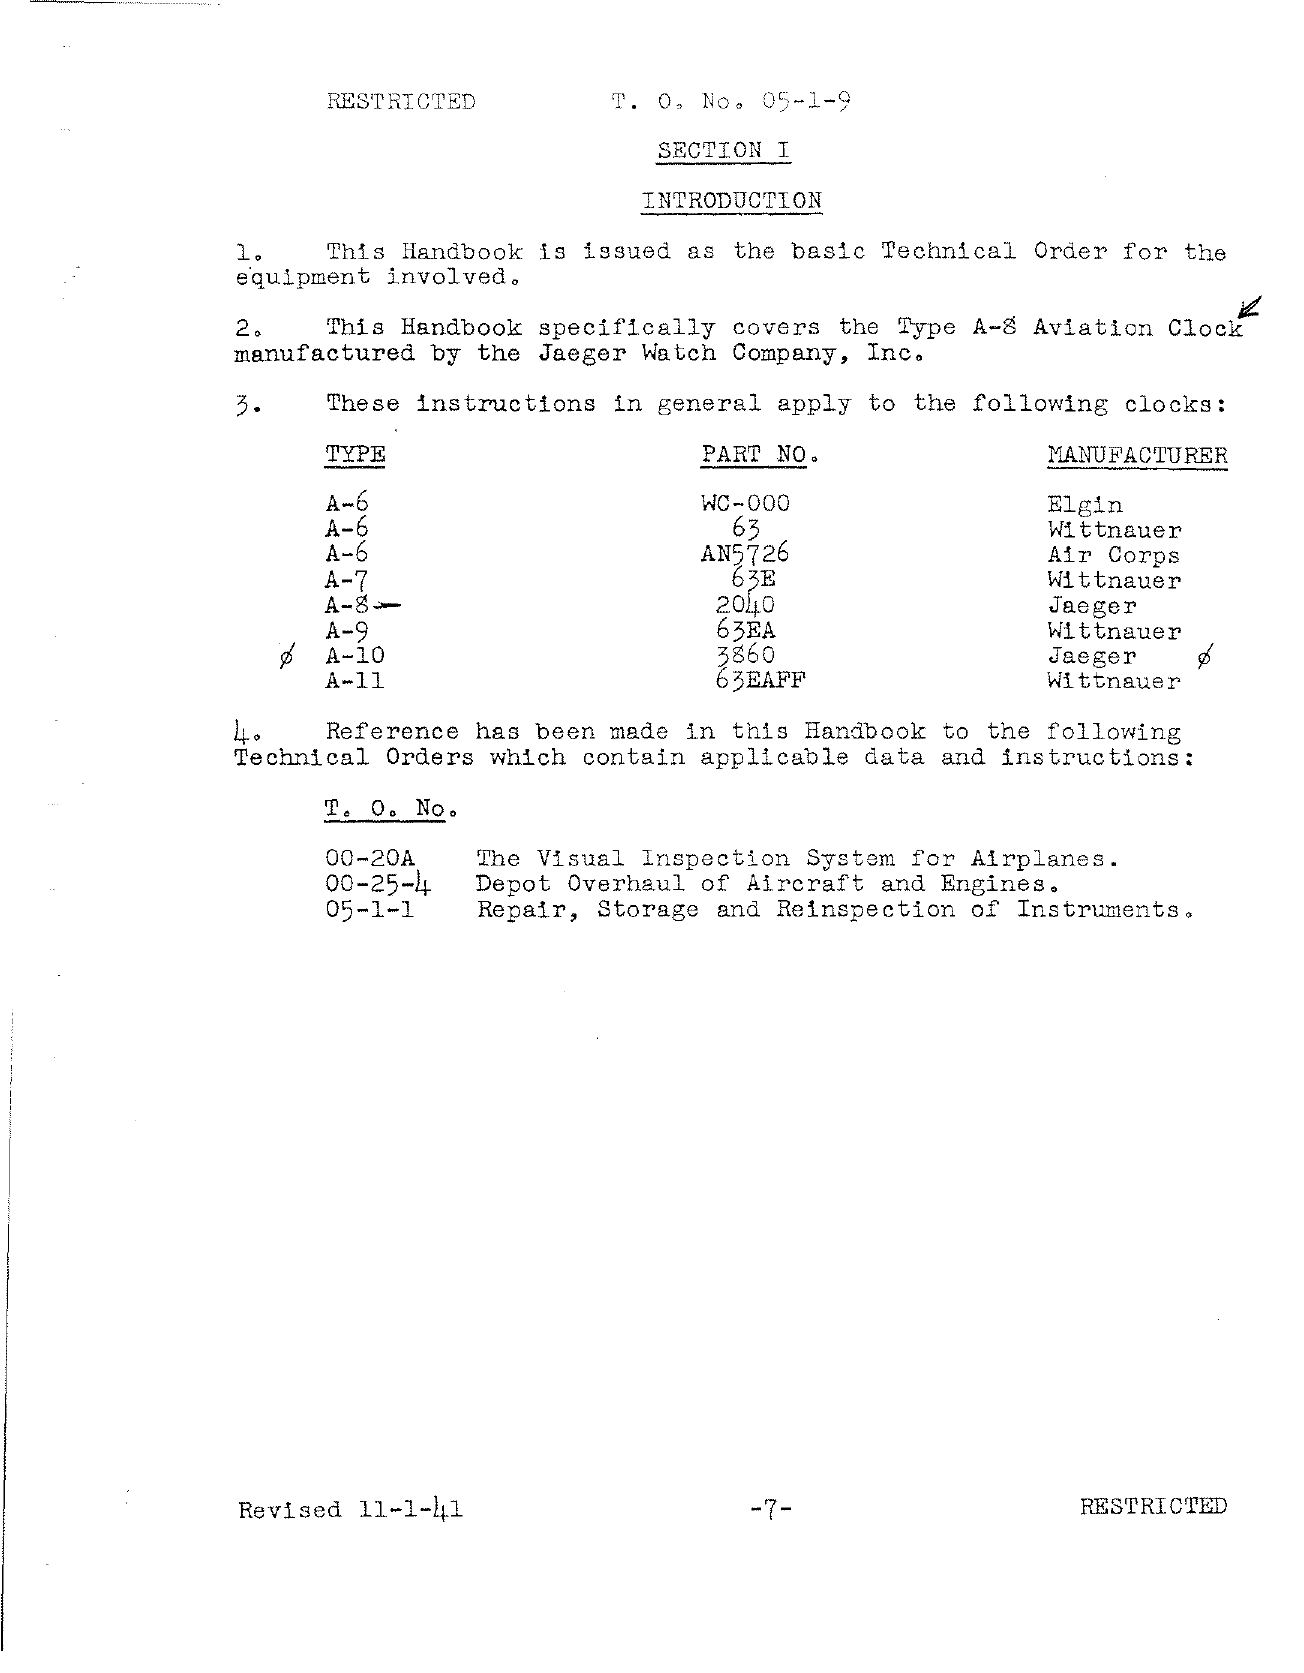 Sample page 6 from AirCorps Library document: Handbook of Instructions with Parts Catalog for Aircraft Clocks (Jaeger)